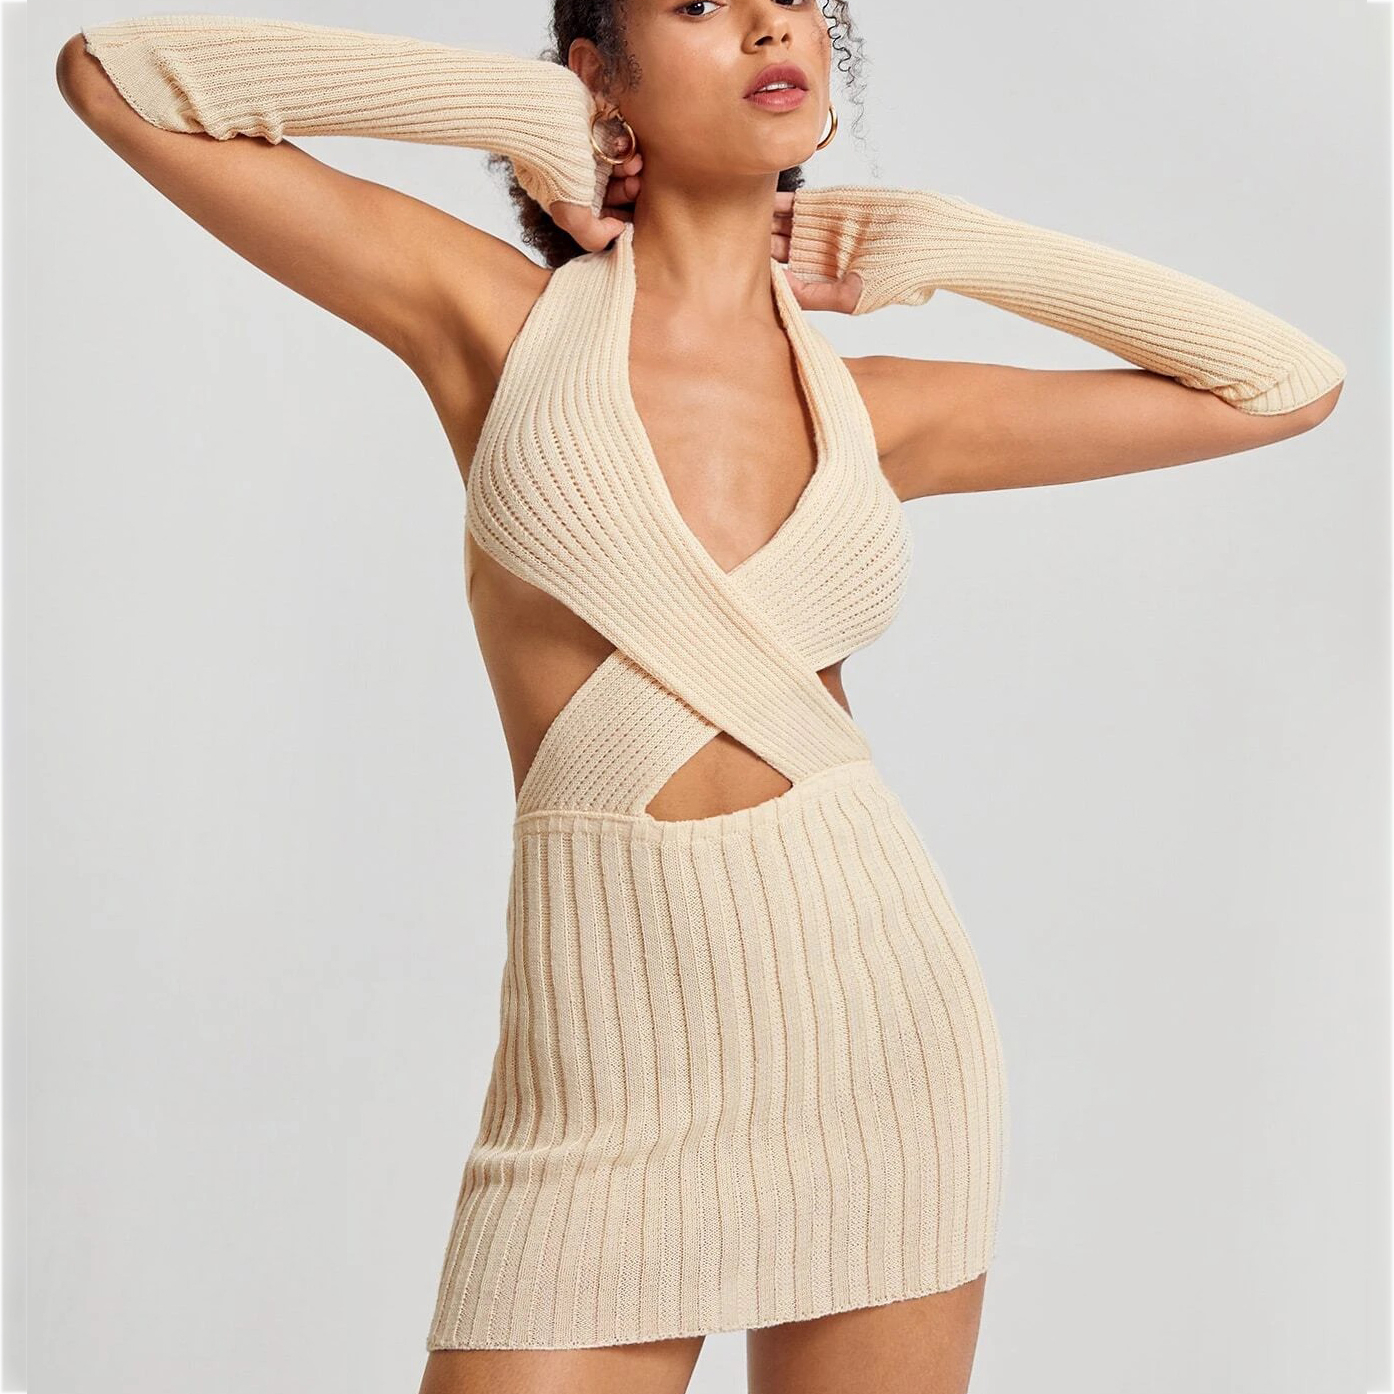 Crisscross Halter Neck Backless Ribbed Knit Bodycon Sweater Dress With Arm Sleeves - S